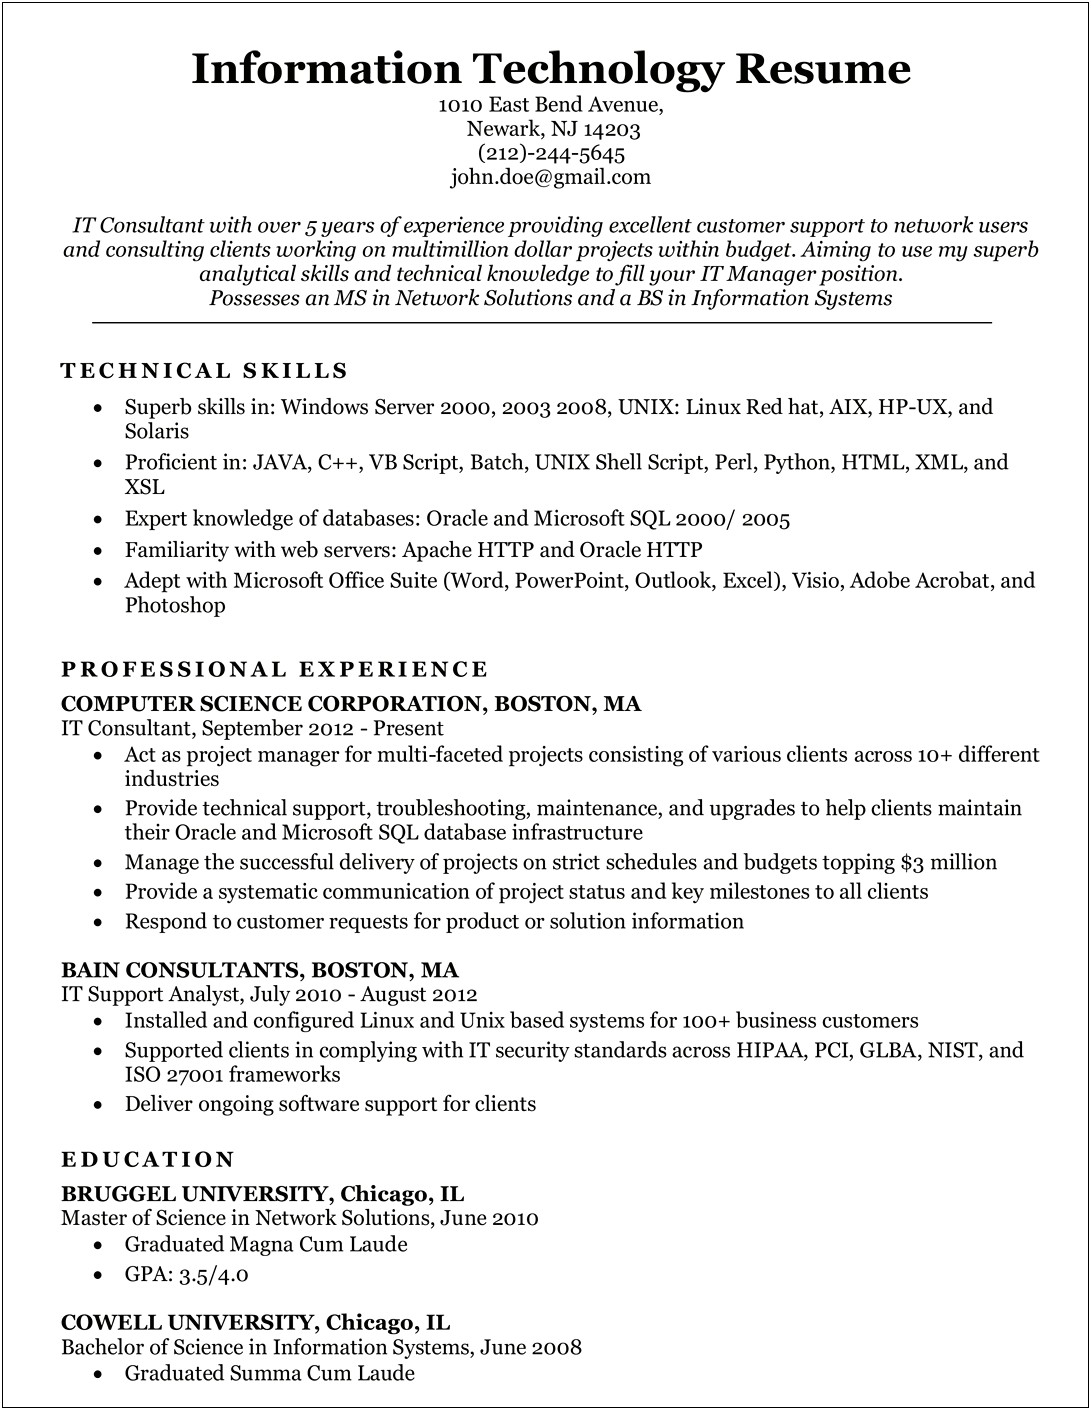 Career Objectives In Resume For Information Technology